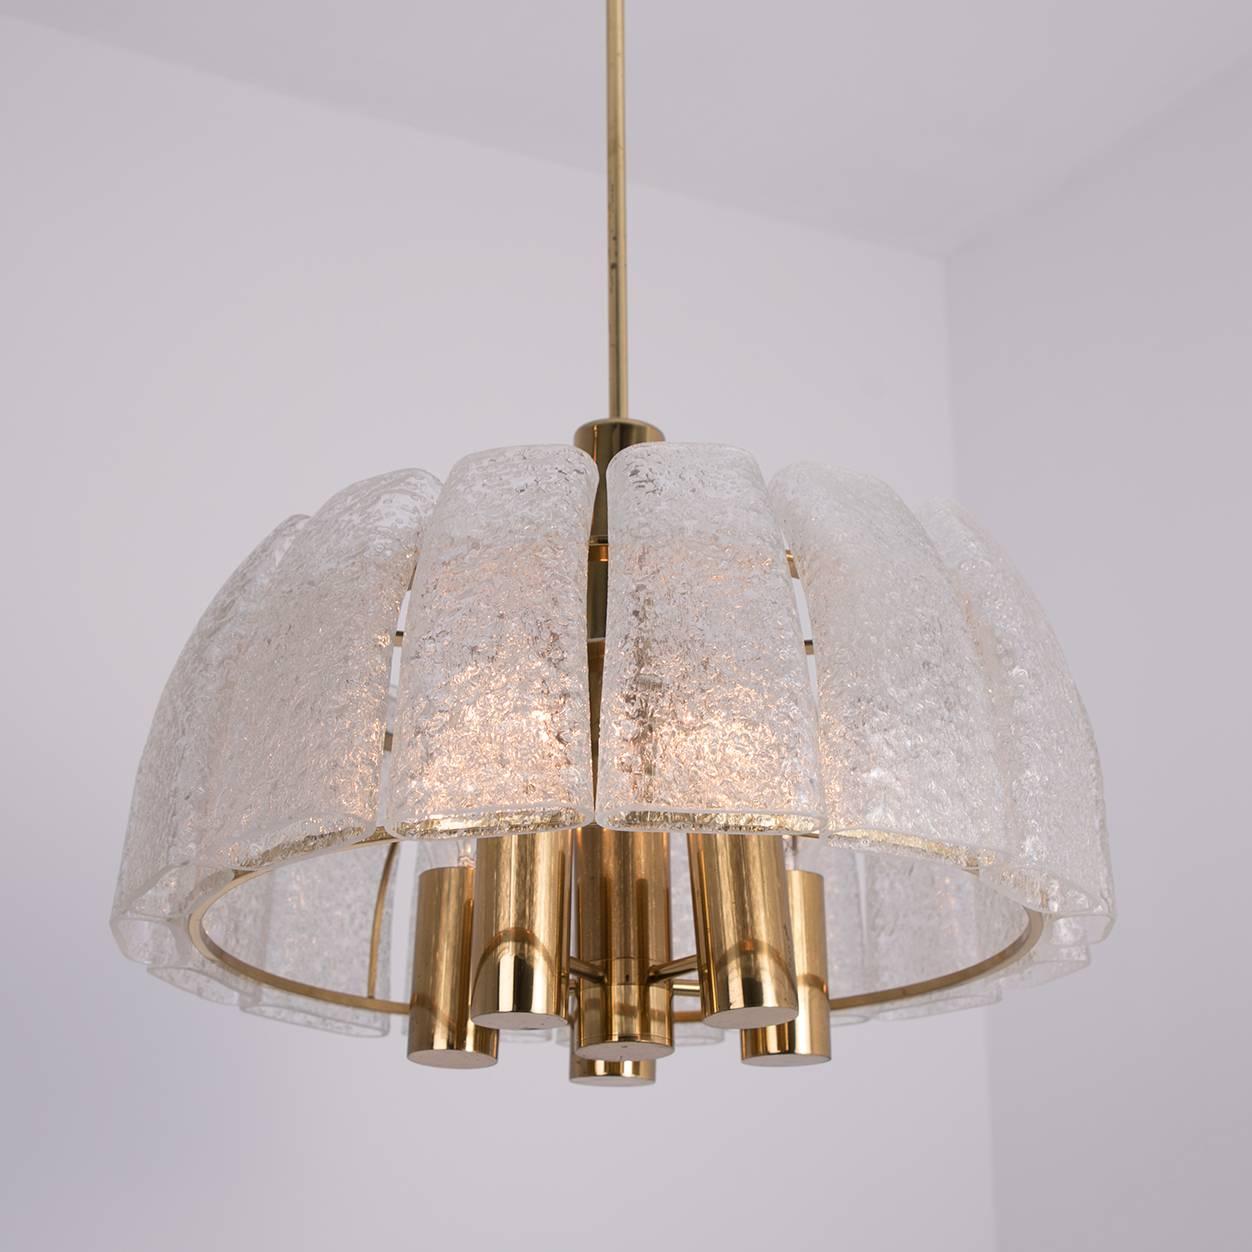 Brushed Doria Light Fixtures, One Chandelier and Two Wall Sconces For Sale